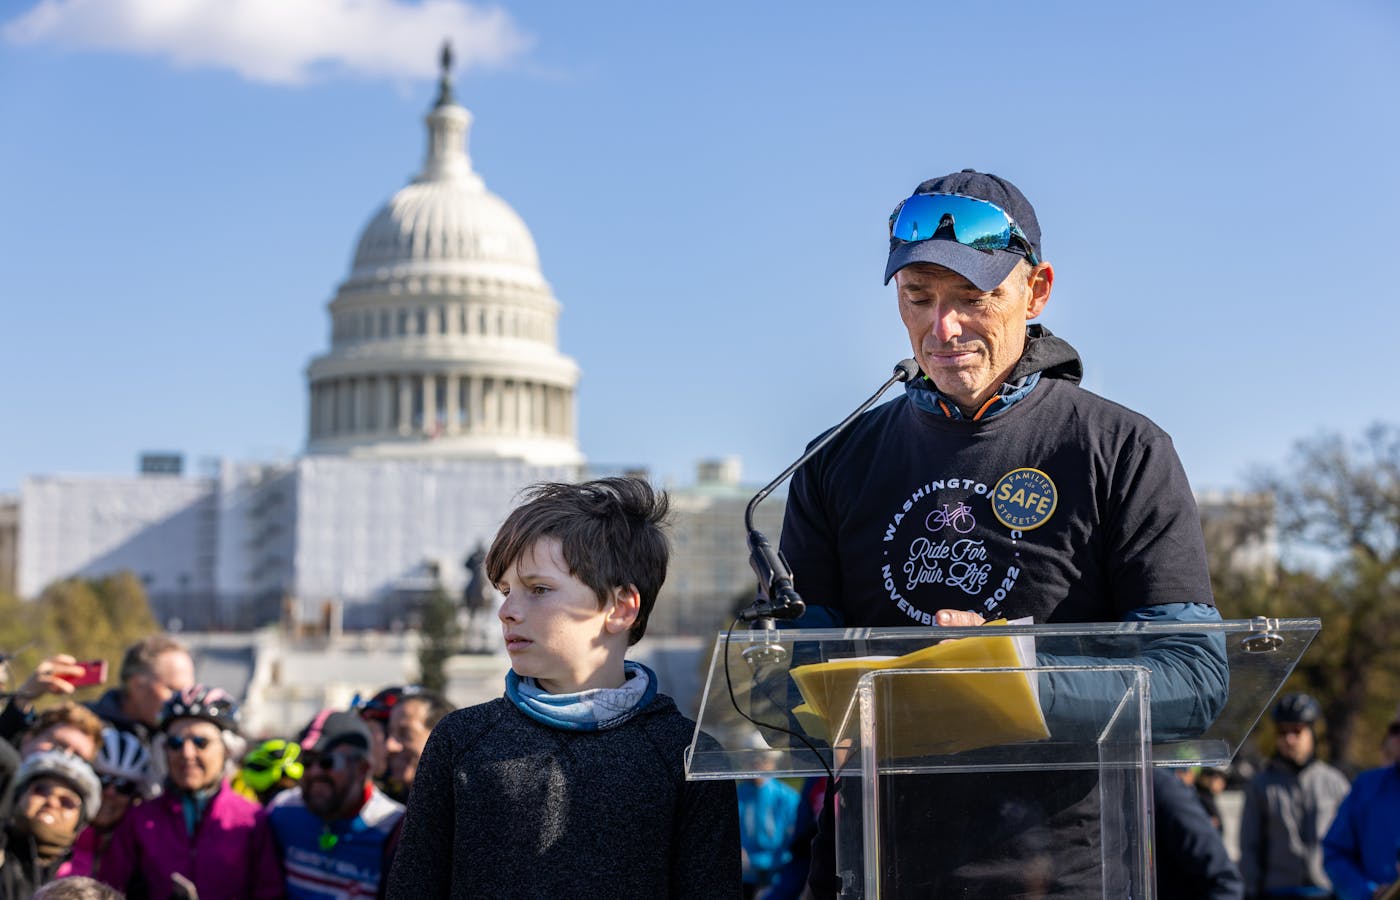 Daniel Langenkamp and son at the Ride for Your Life rally on November 19, 2022. (Photo credit: Brian Rimm)